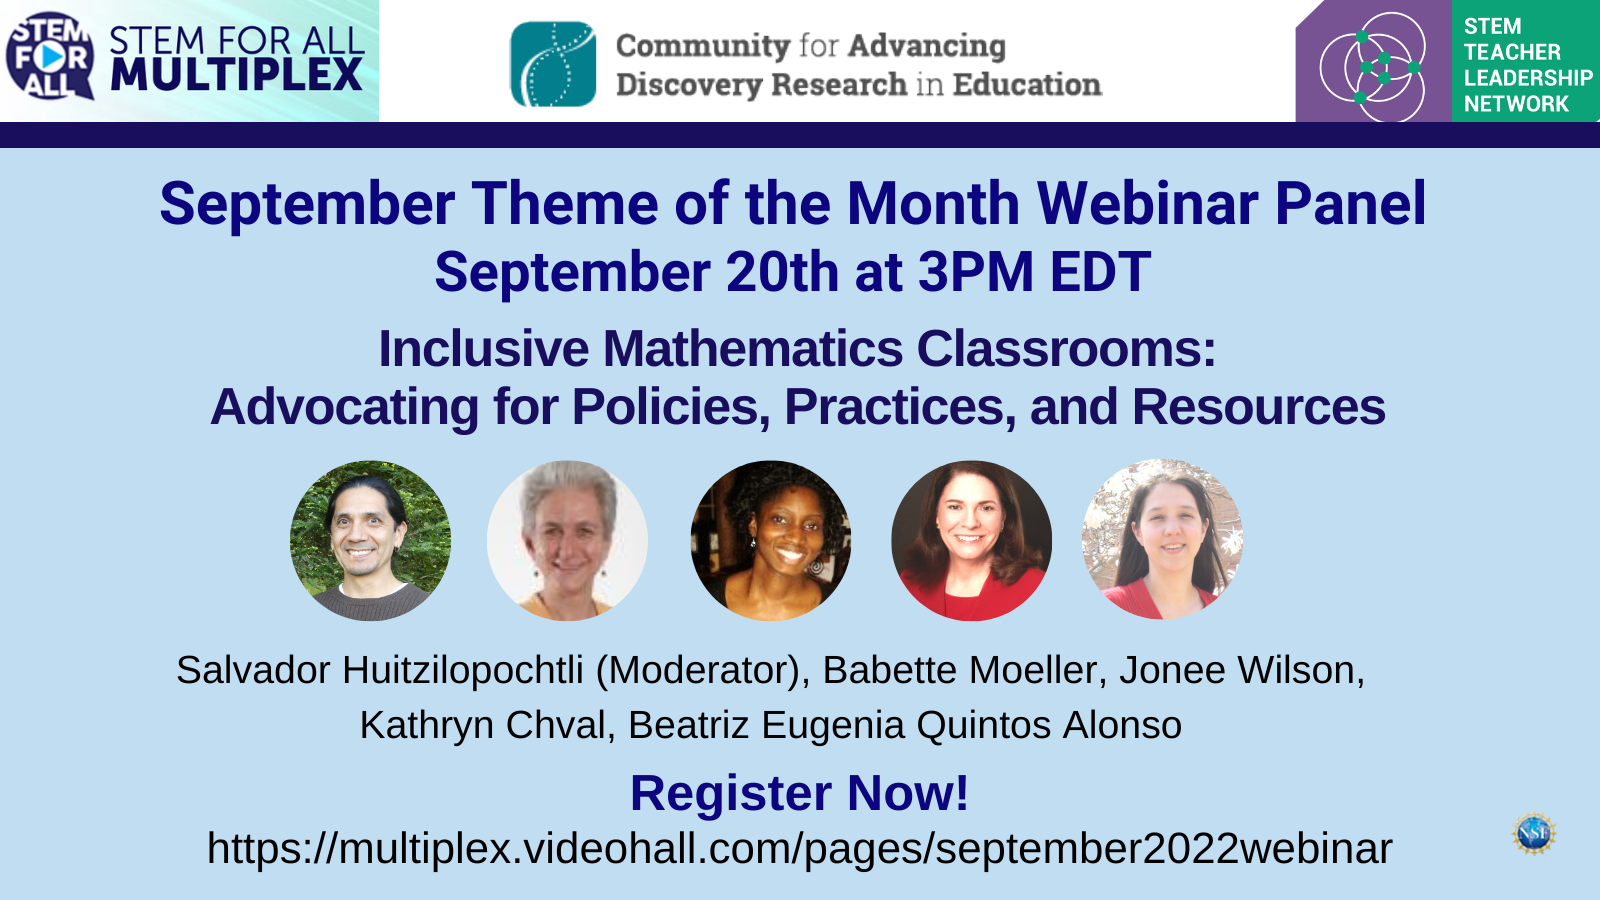 Portraits of panelists for the STEM for All Multiplex Webinar on inclusive mathematics classrooms.